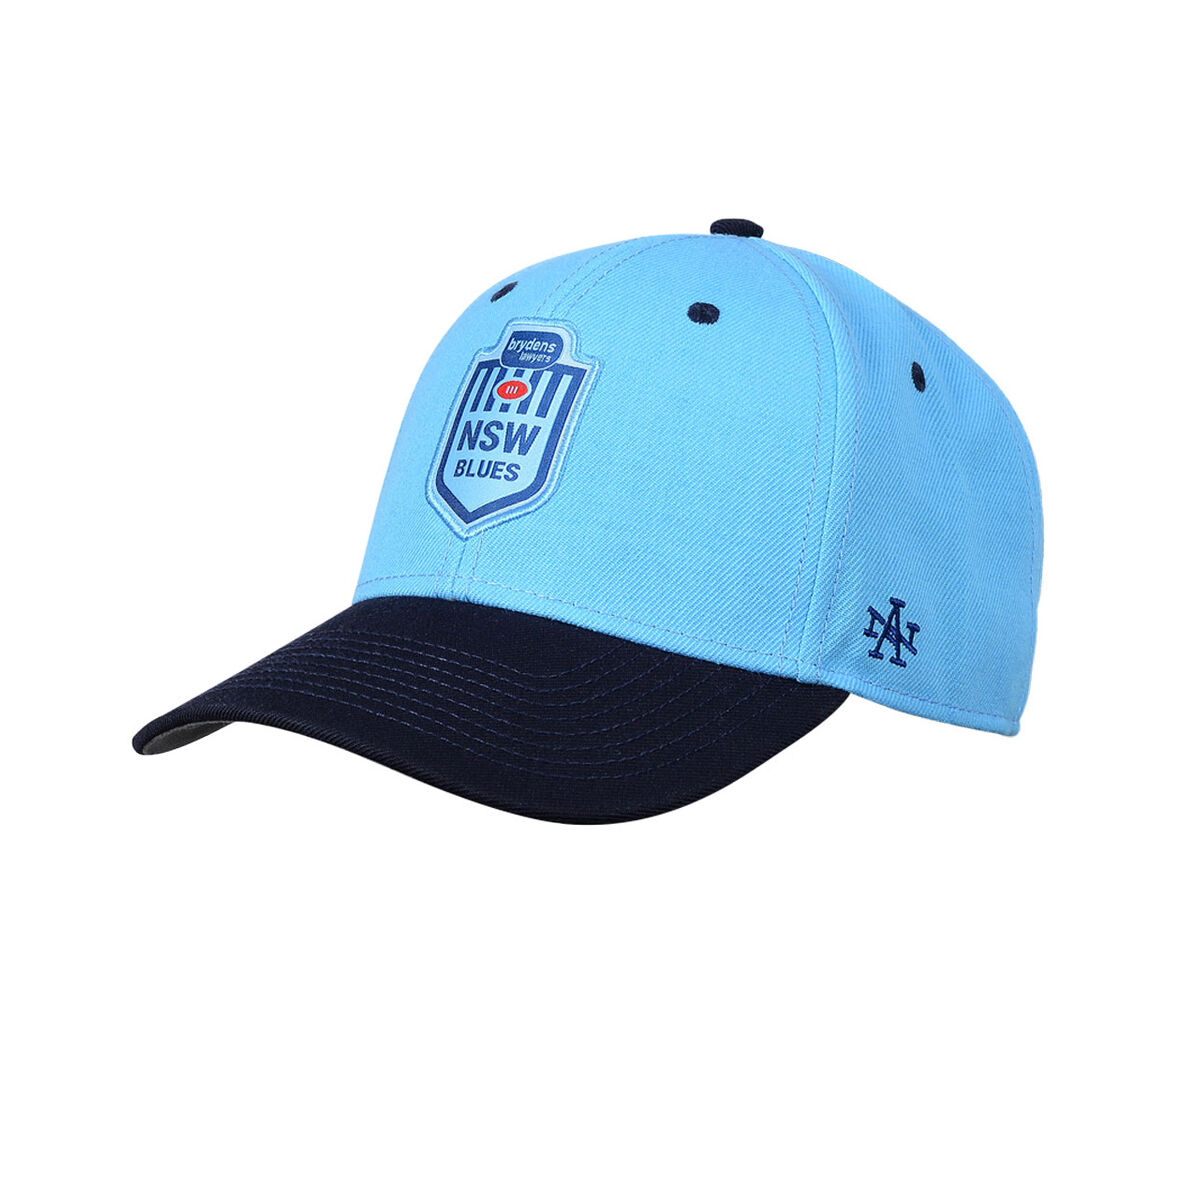 New South Wales NSW Blues State Of Origin Burley Sekem Completion Cap/Hat! 